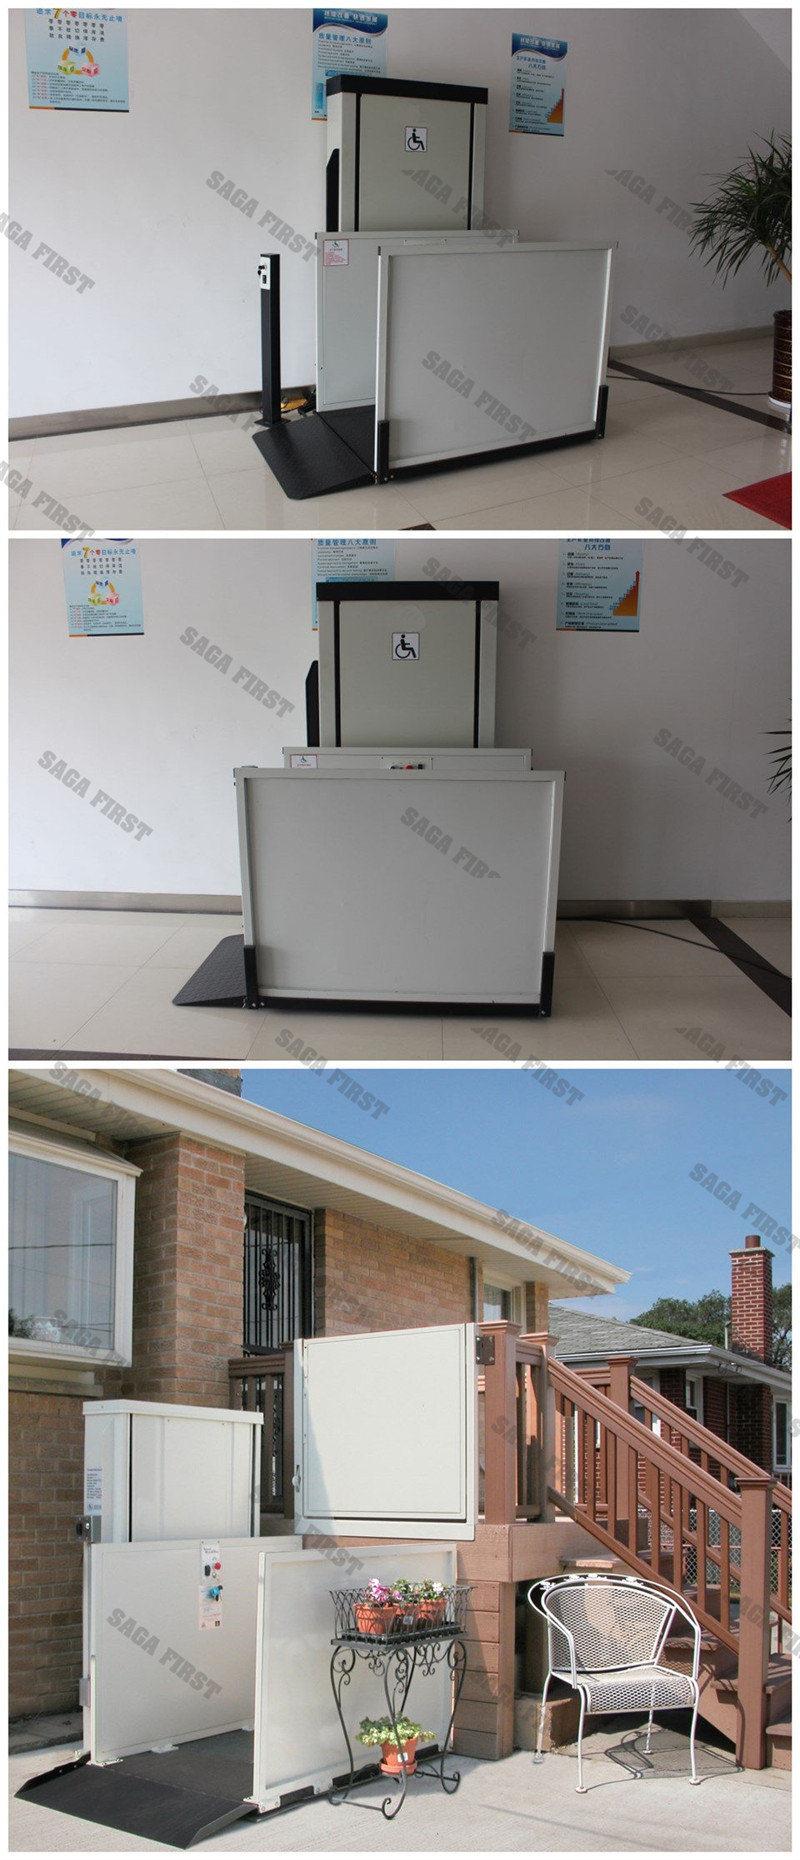 Vertical Platform Handicapped Hydraulic Wheelchair Lifts Home Elevator Lift for Disabled People